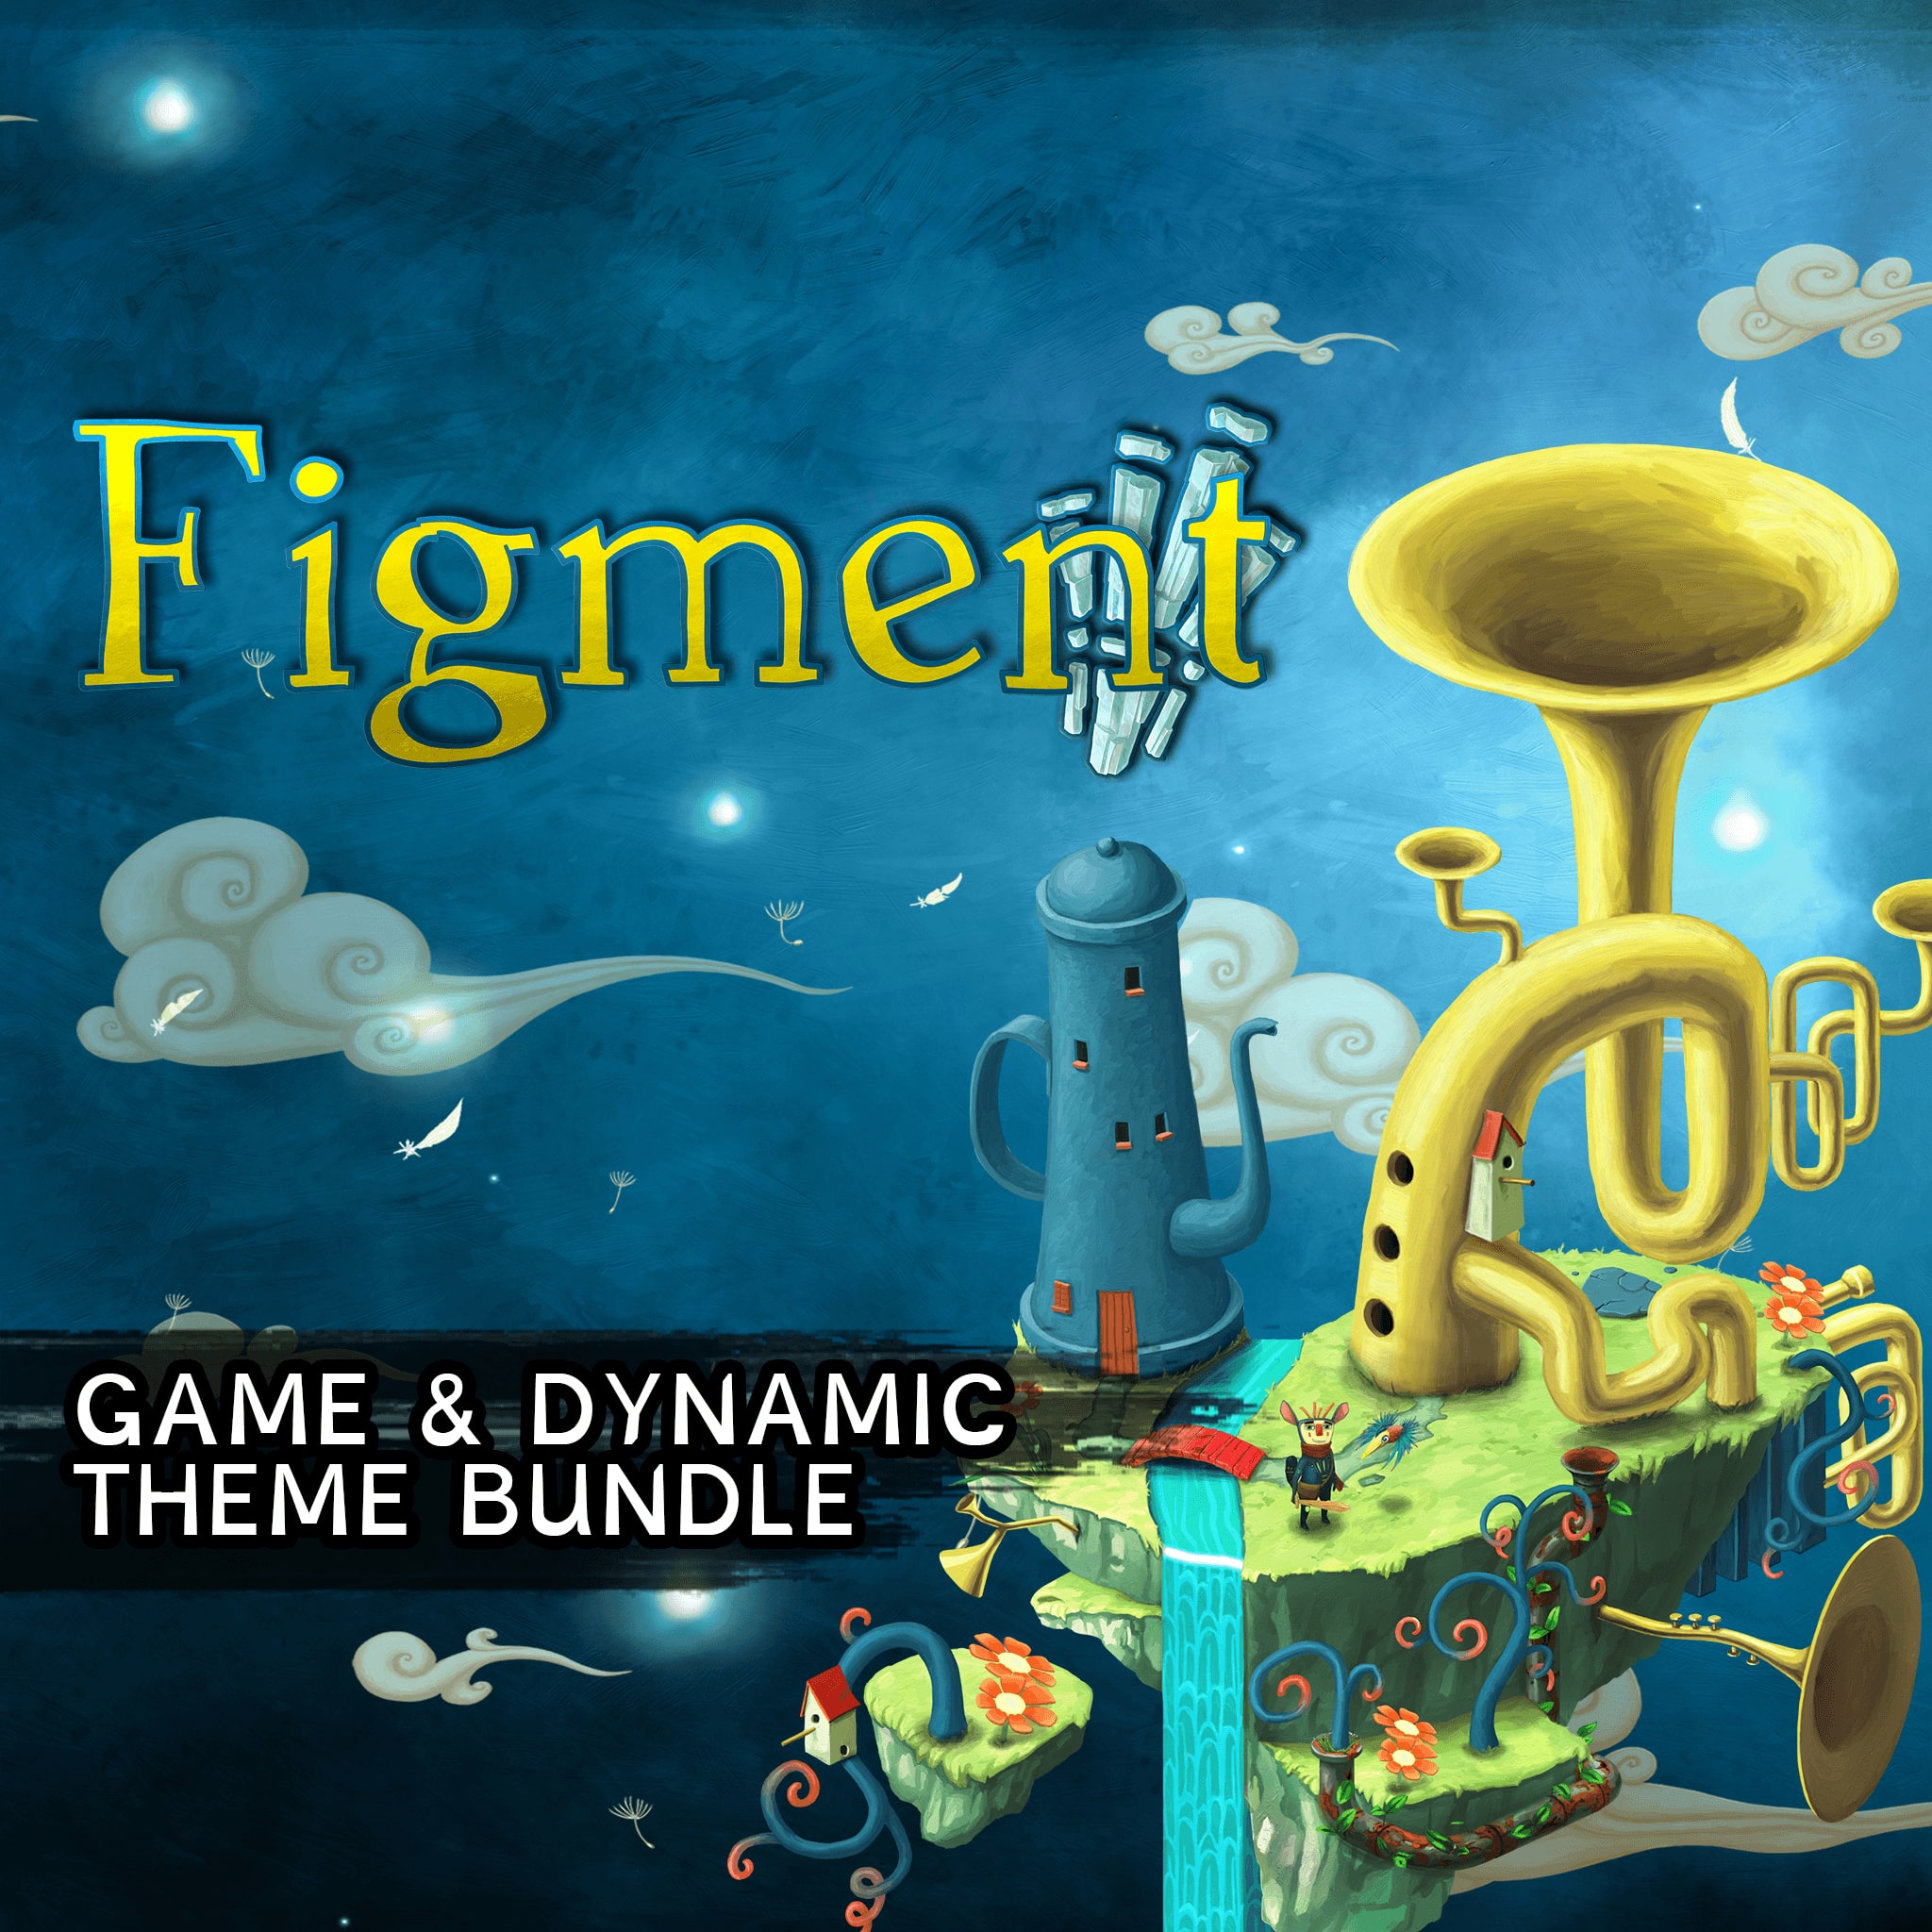 Figment - Game and Dynamic Theme Bundle